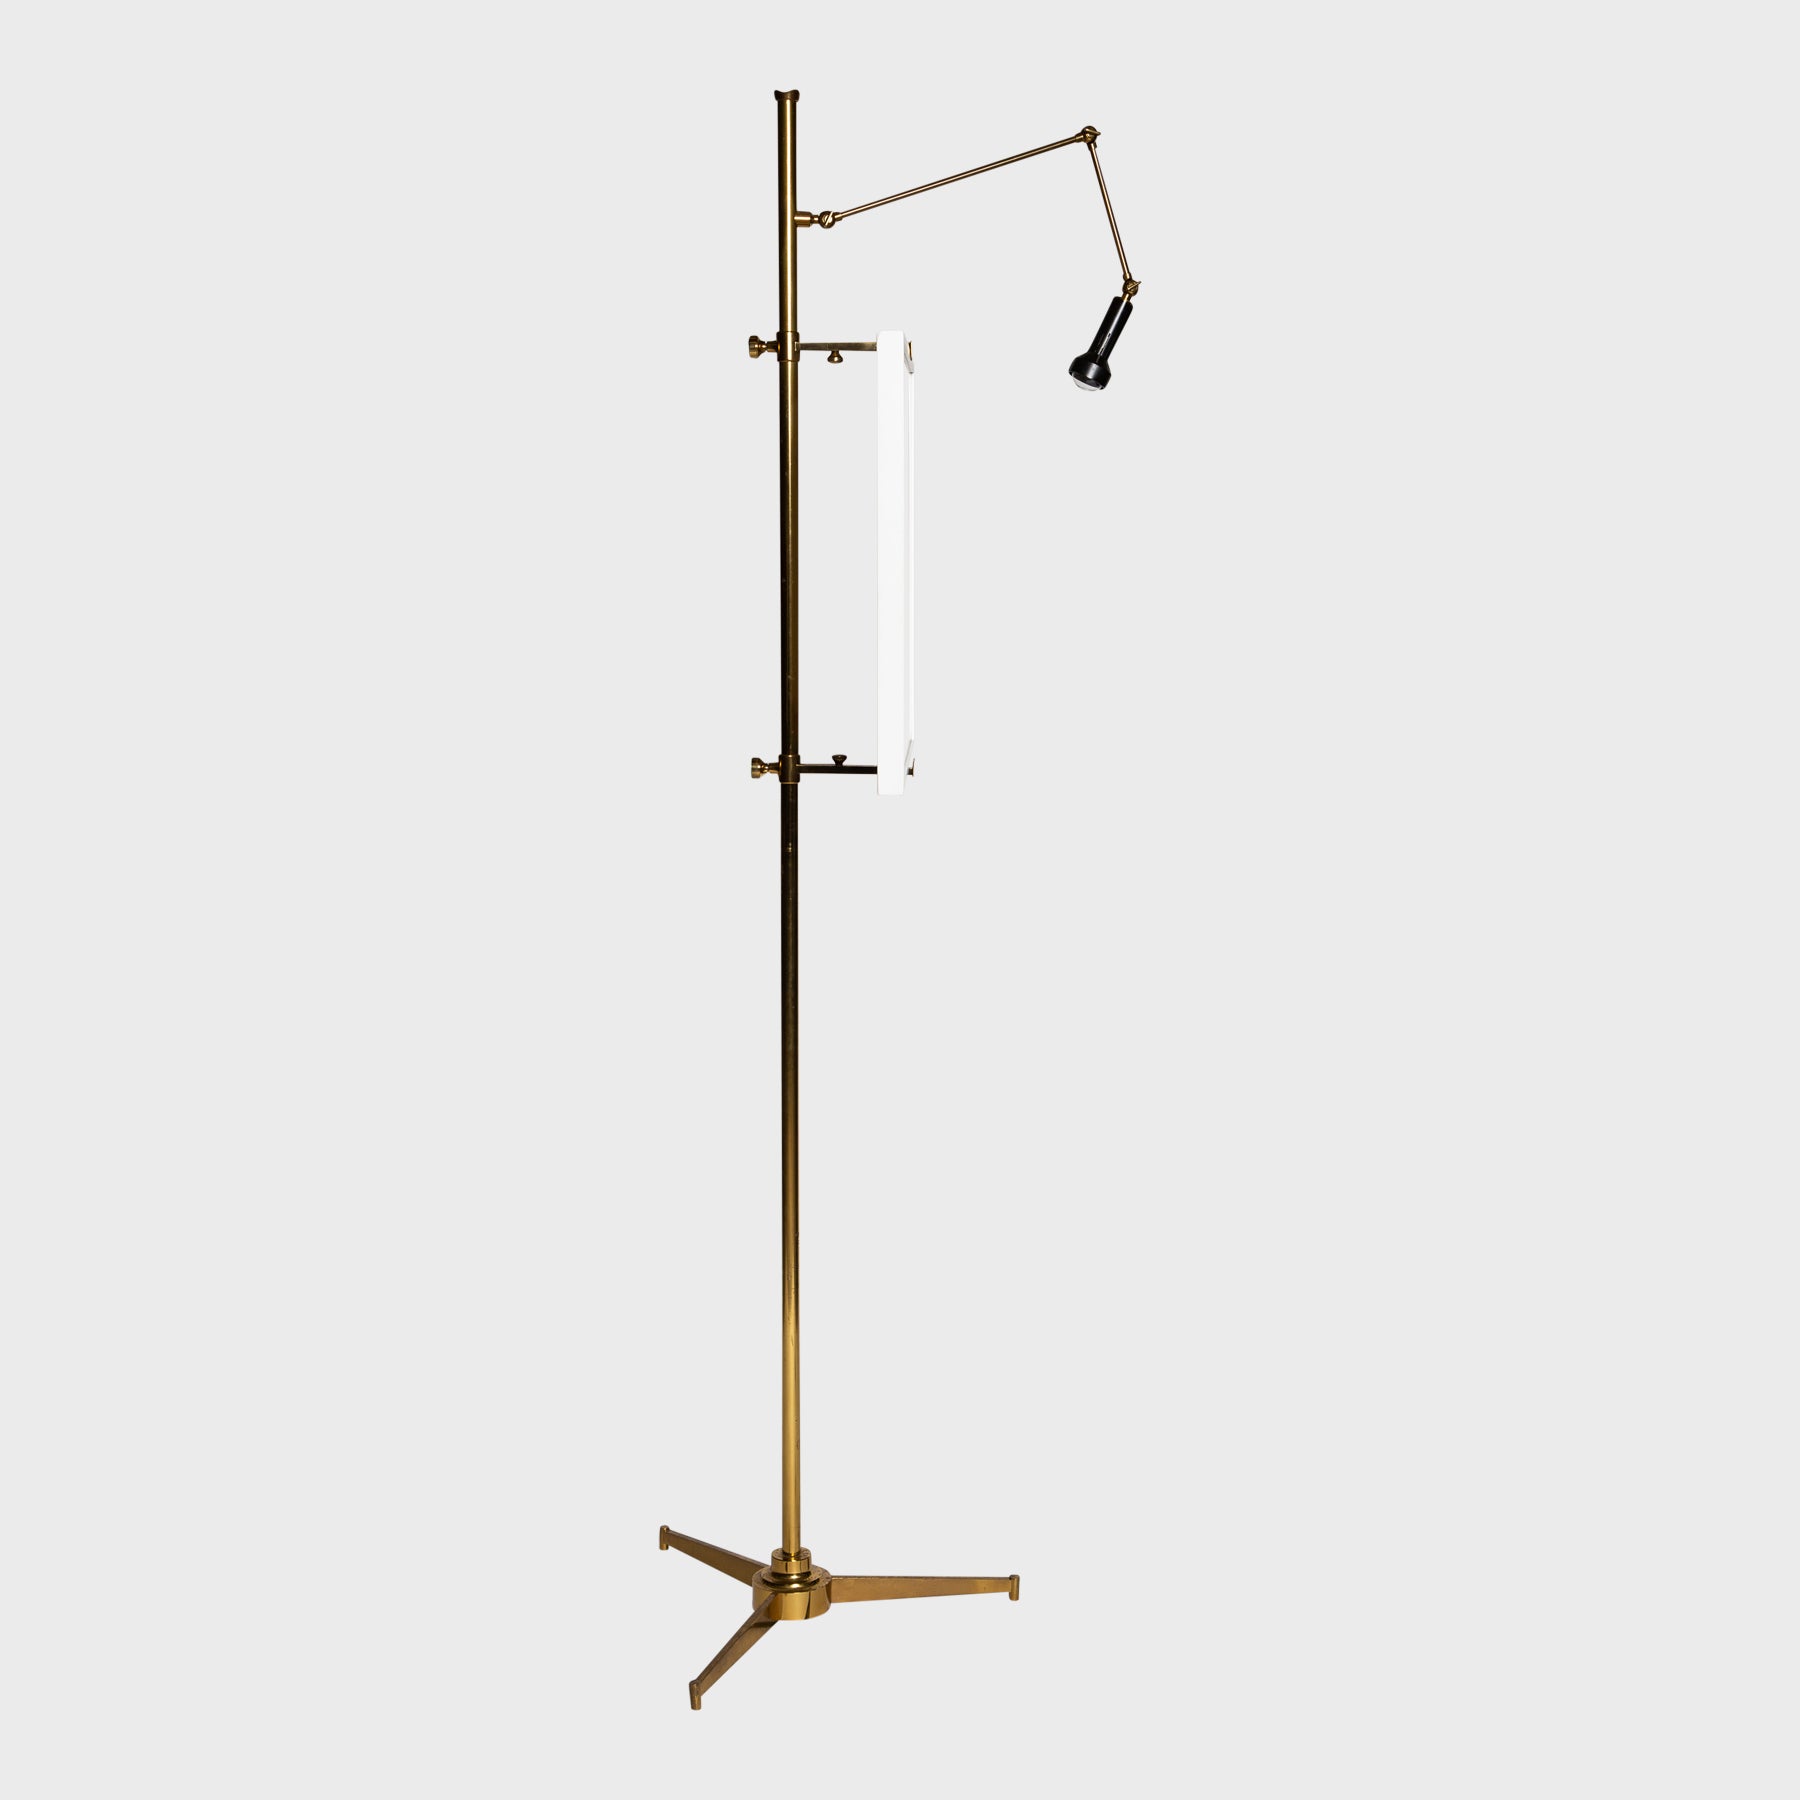 Illuminated Gallery Standing Easel